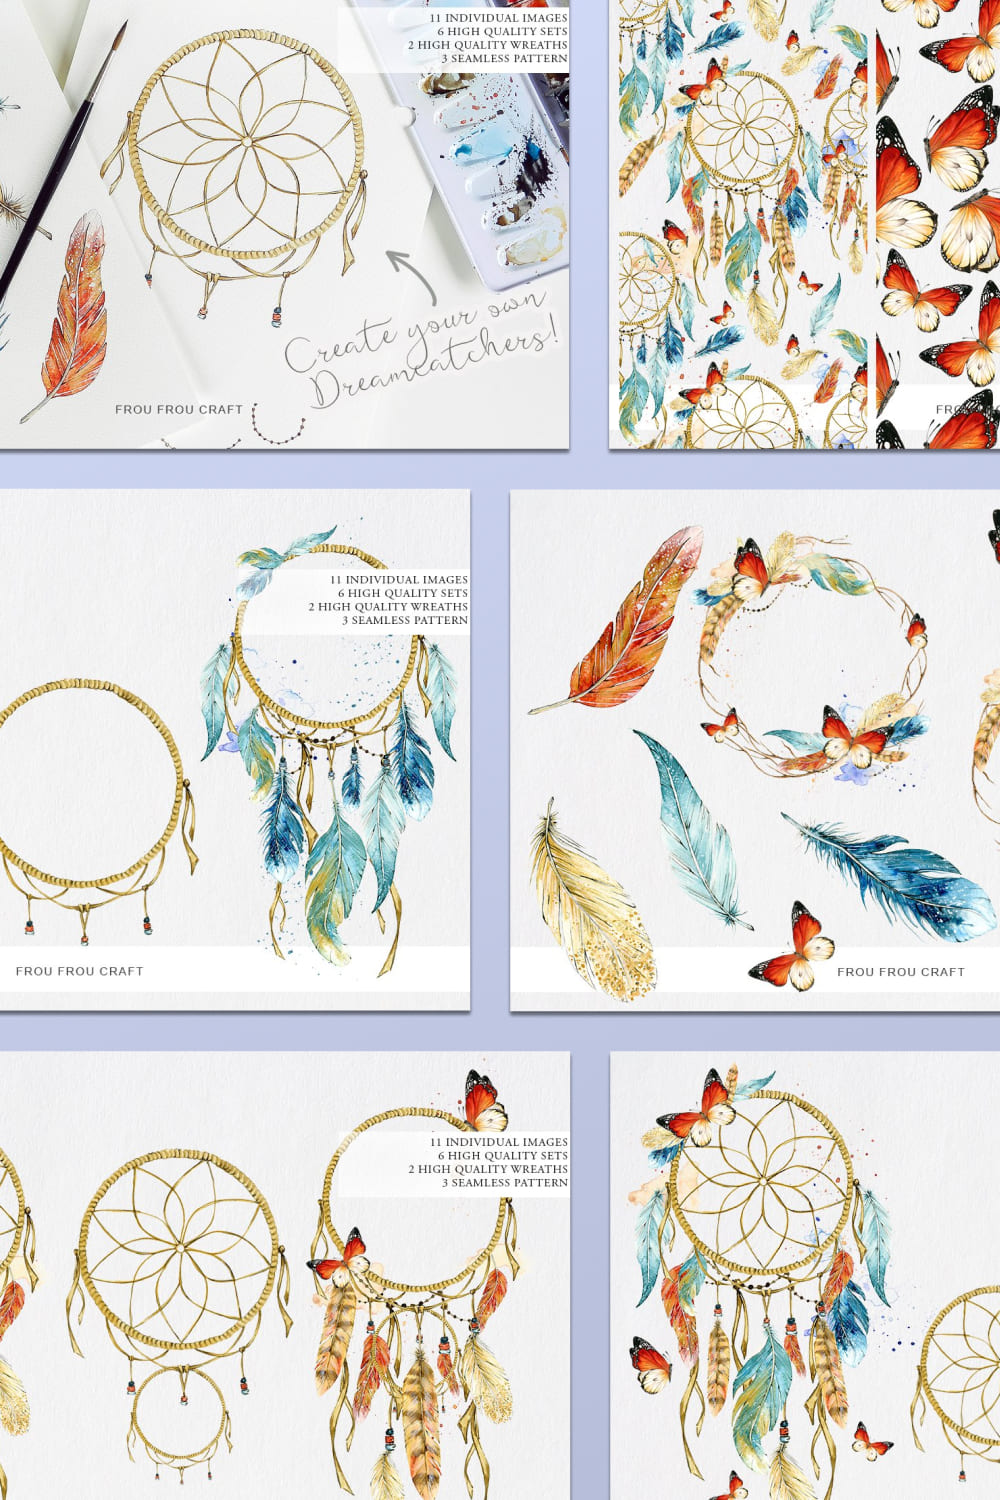 dream catchers and feathers hand drawn illustrations.